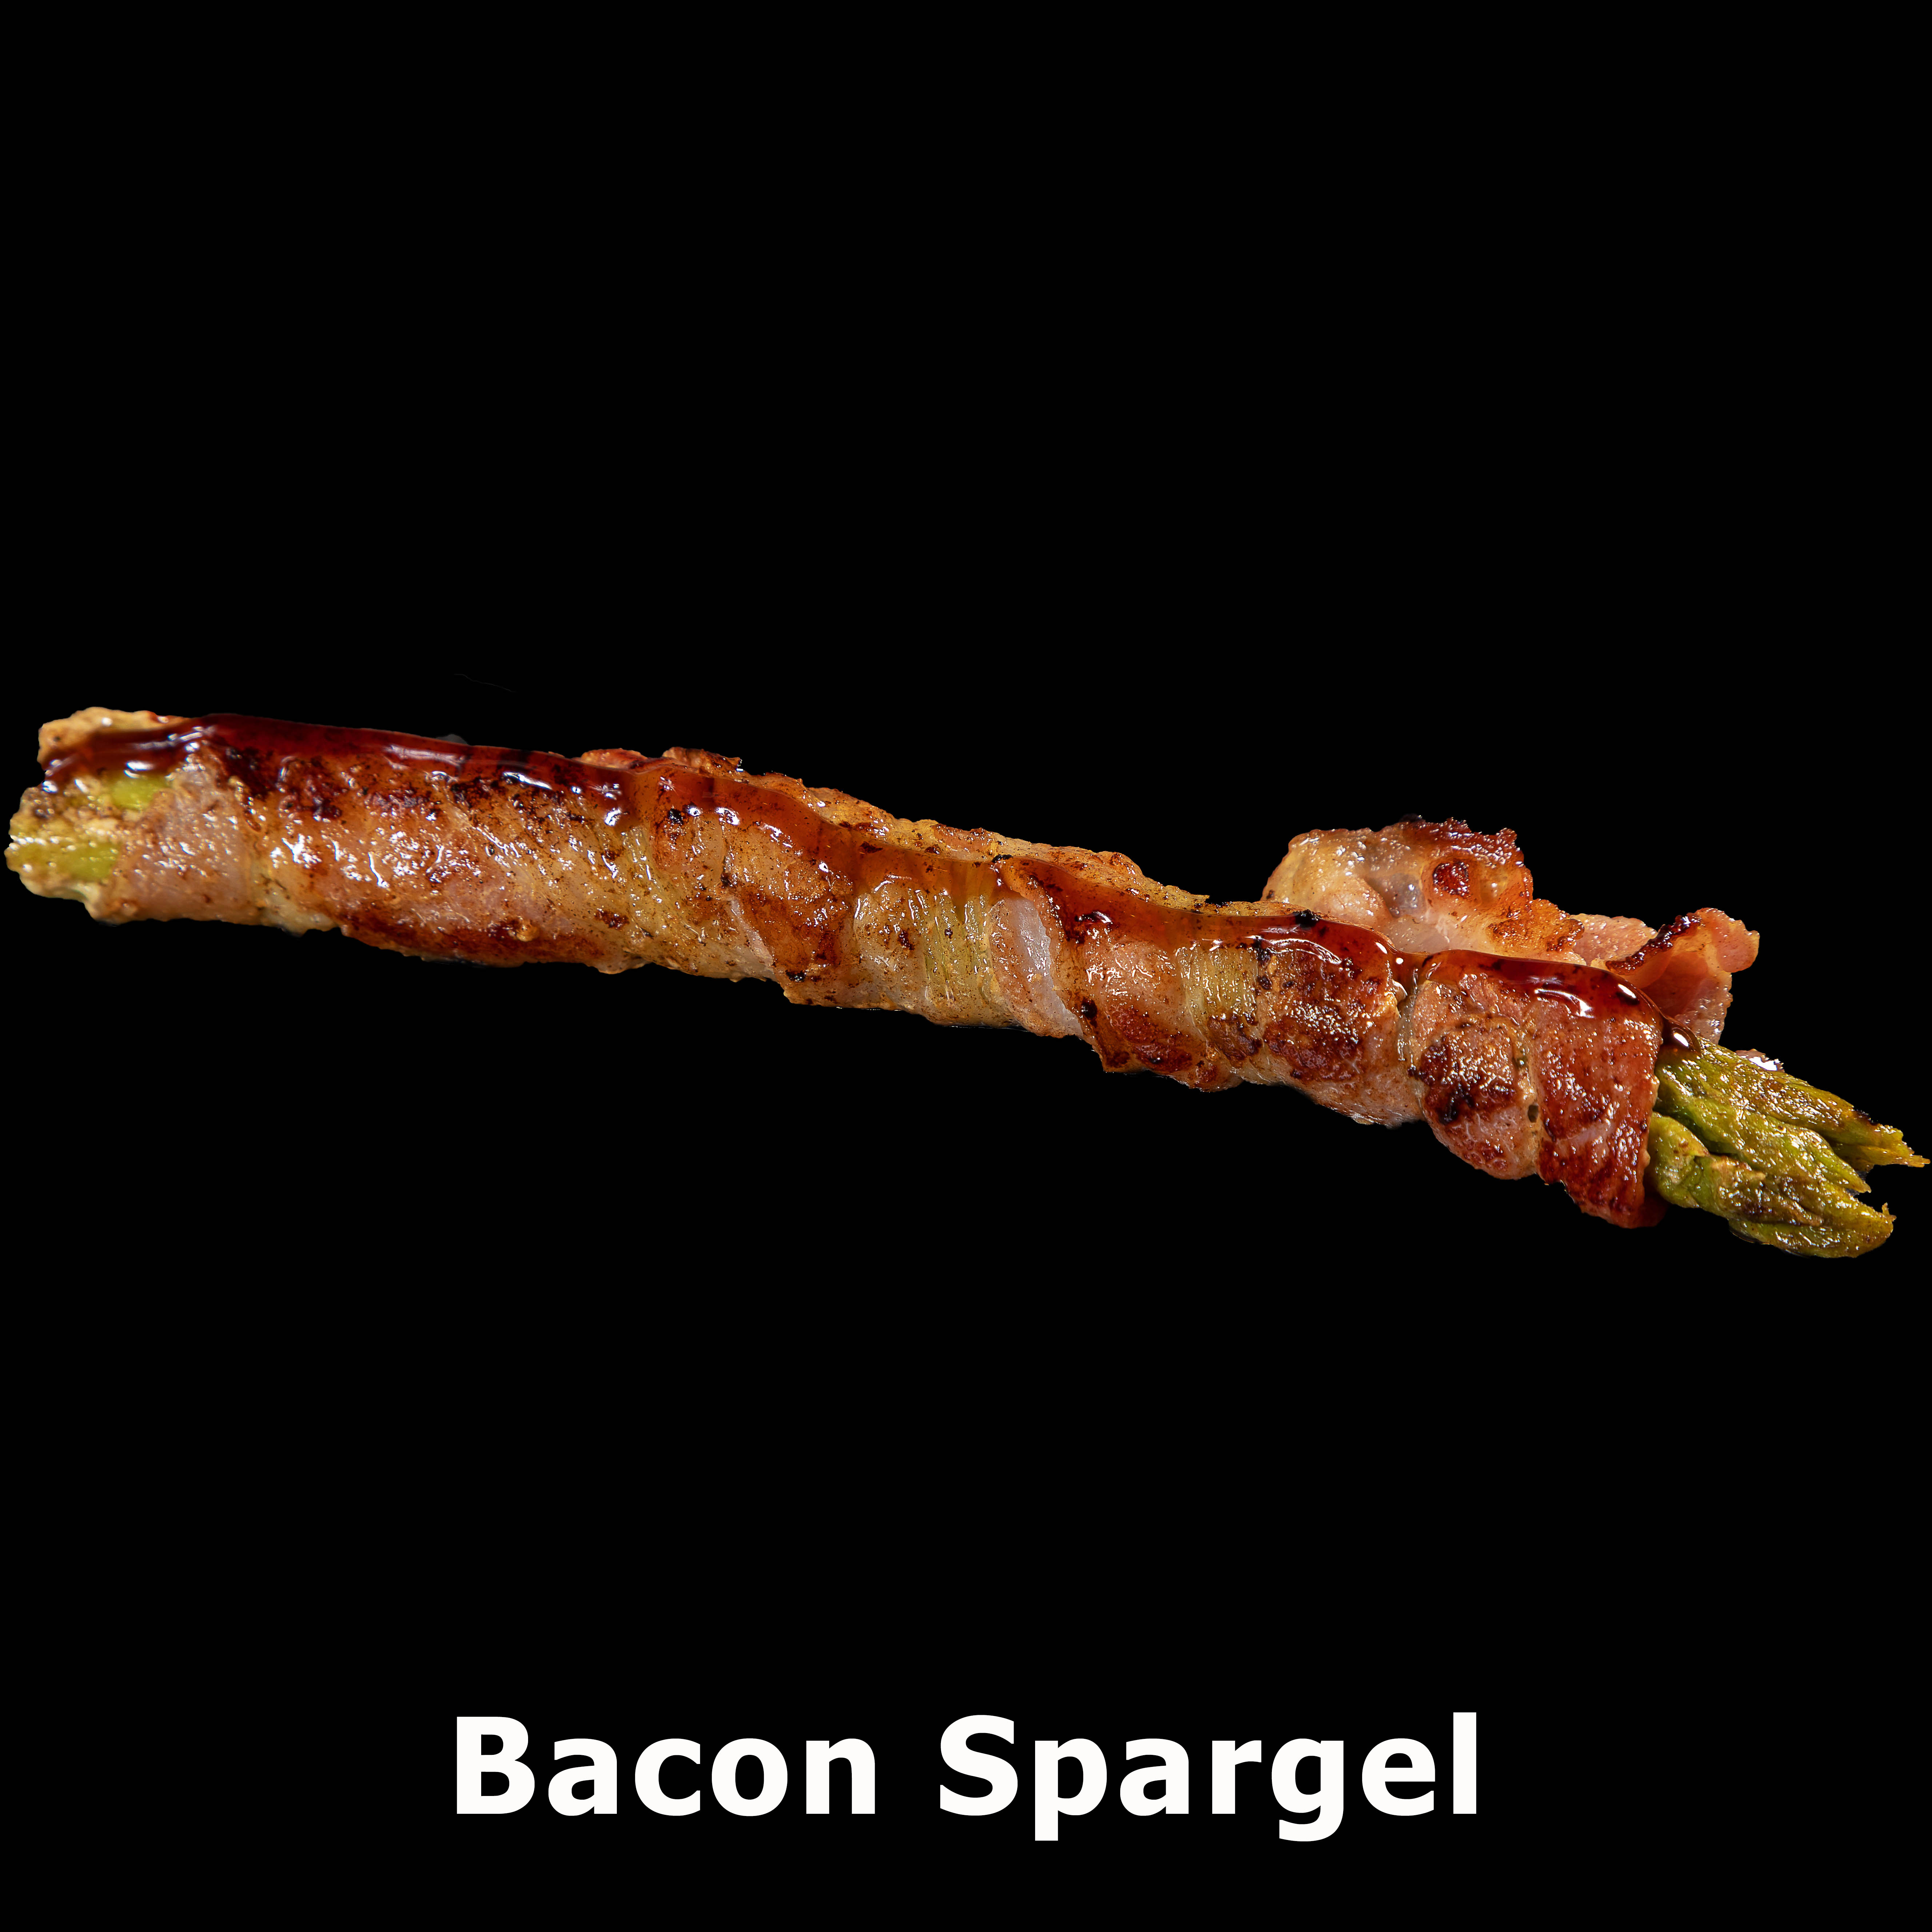 149. Bacon Spargel